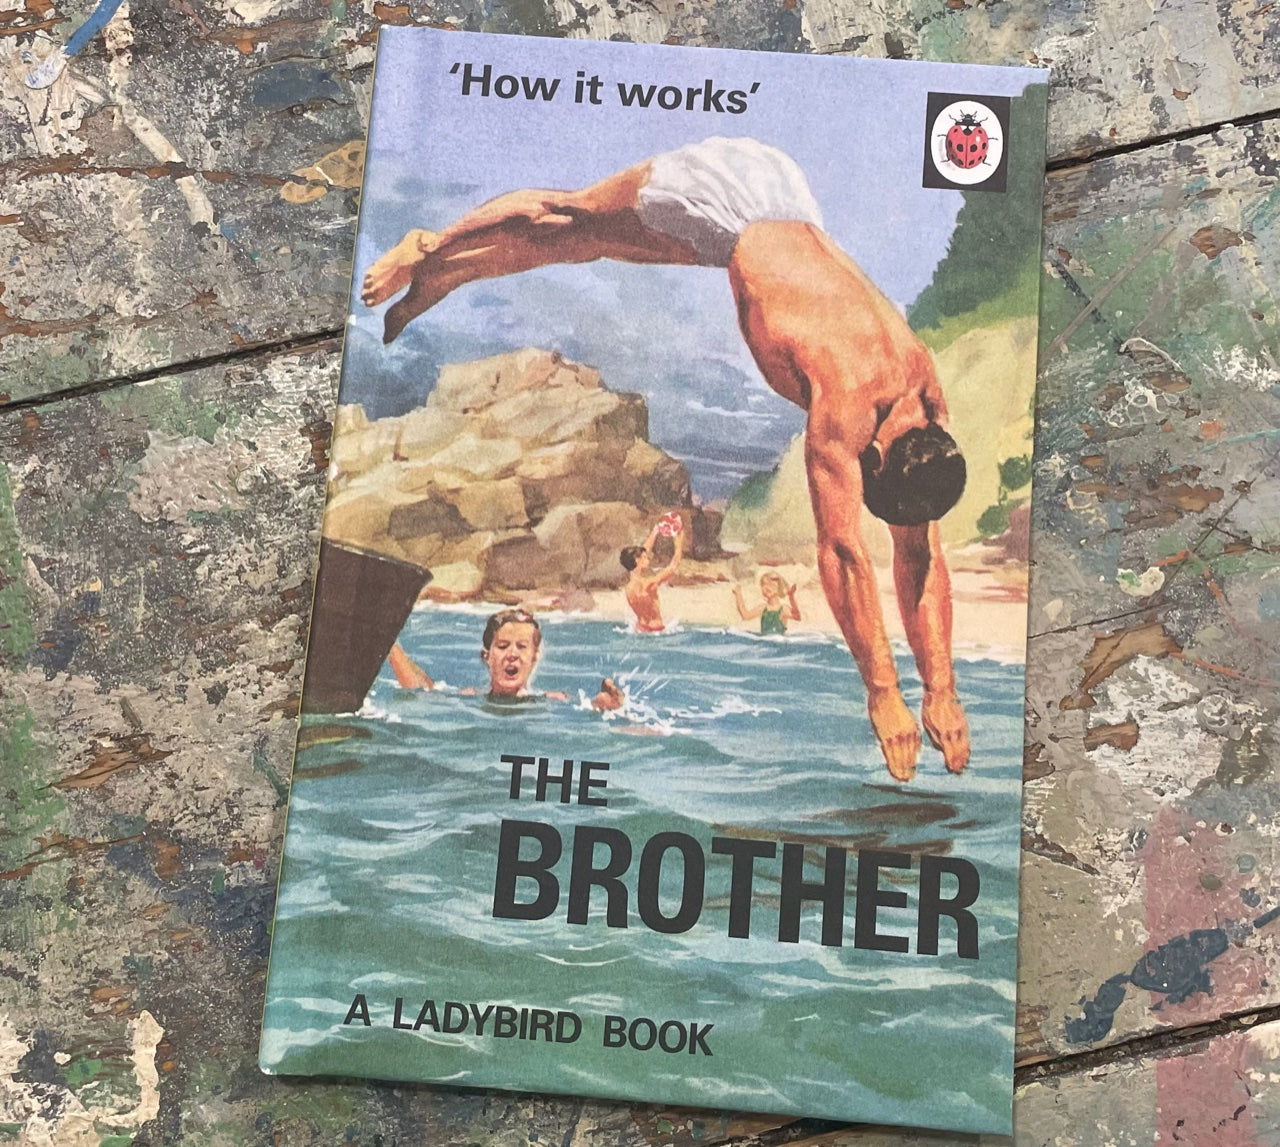 LadyBird book of The Brother